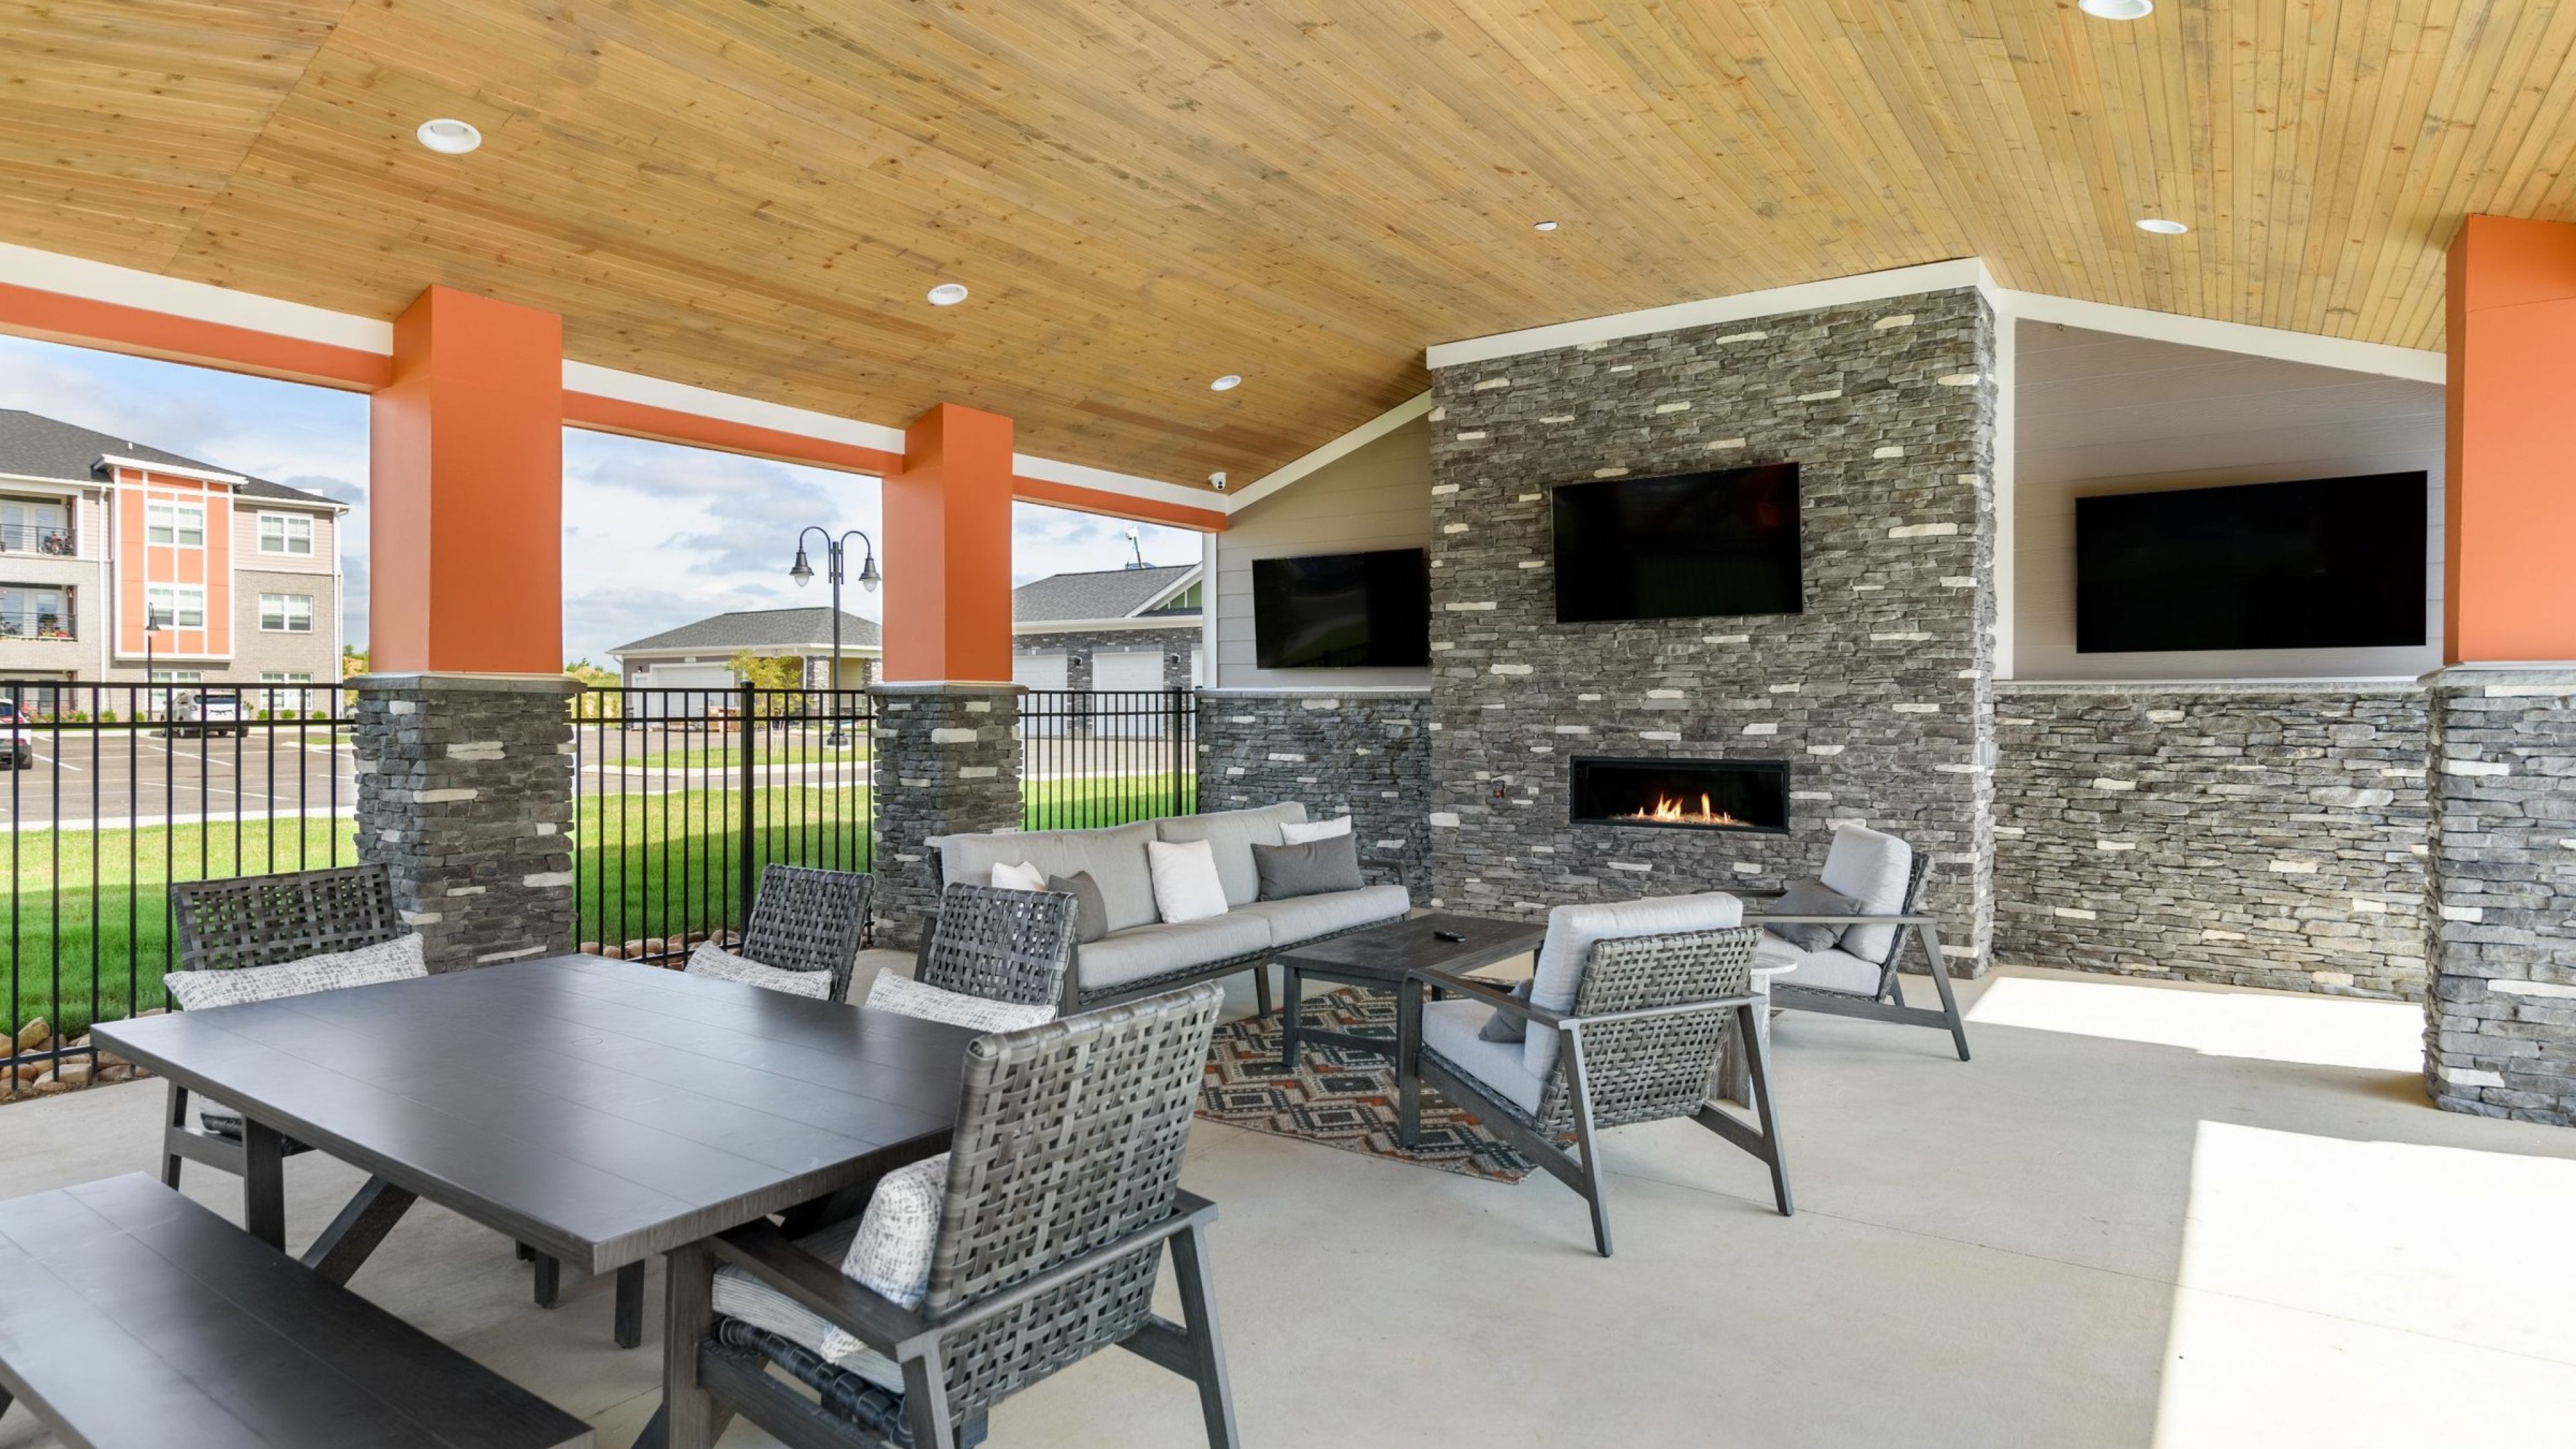 Hawthorne at the Crest outdoor amenity area with fireplace, seating, and large TV